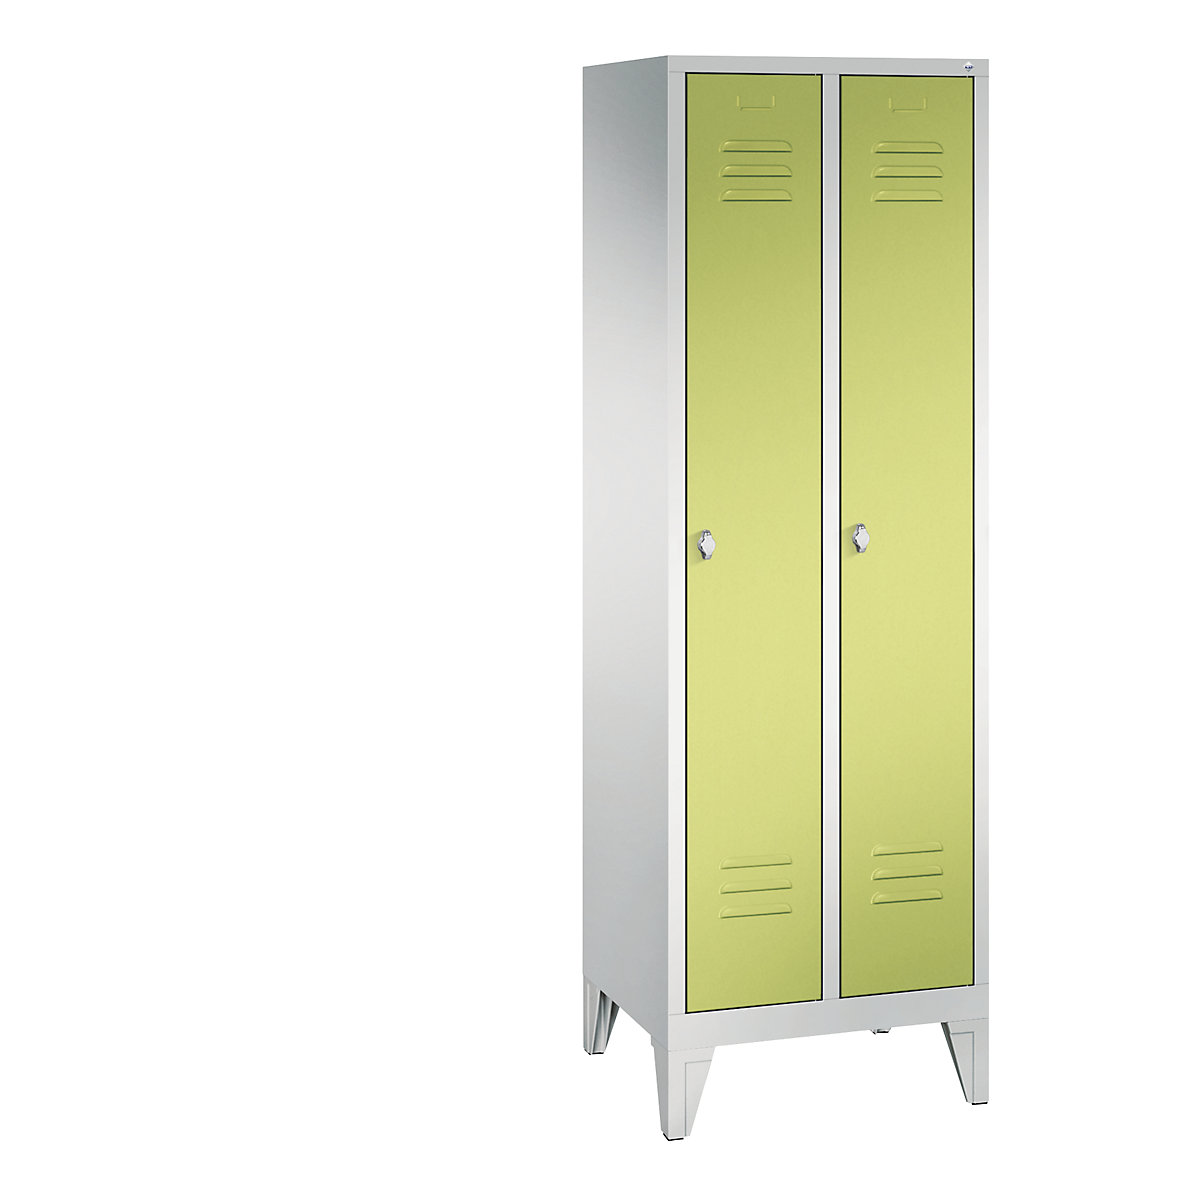 CLASSIC cloakroom locker with feet – C+P, 2 compartments, compartment width 300 mm, light grey / viridian green-3